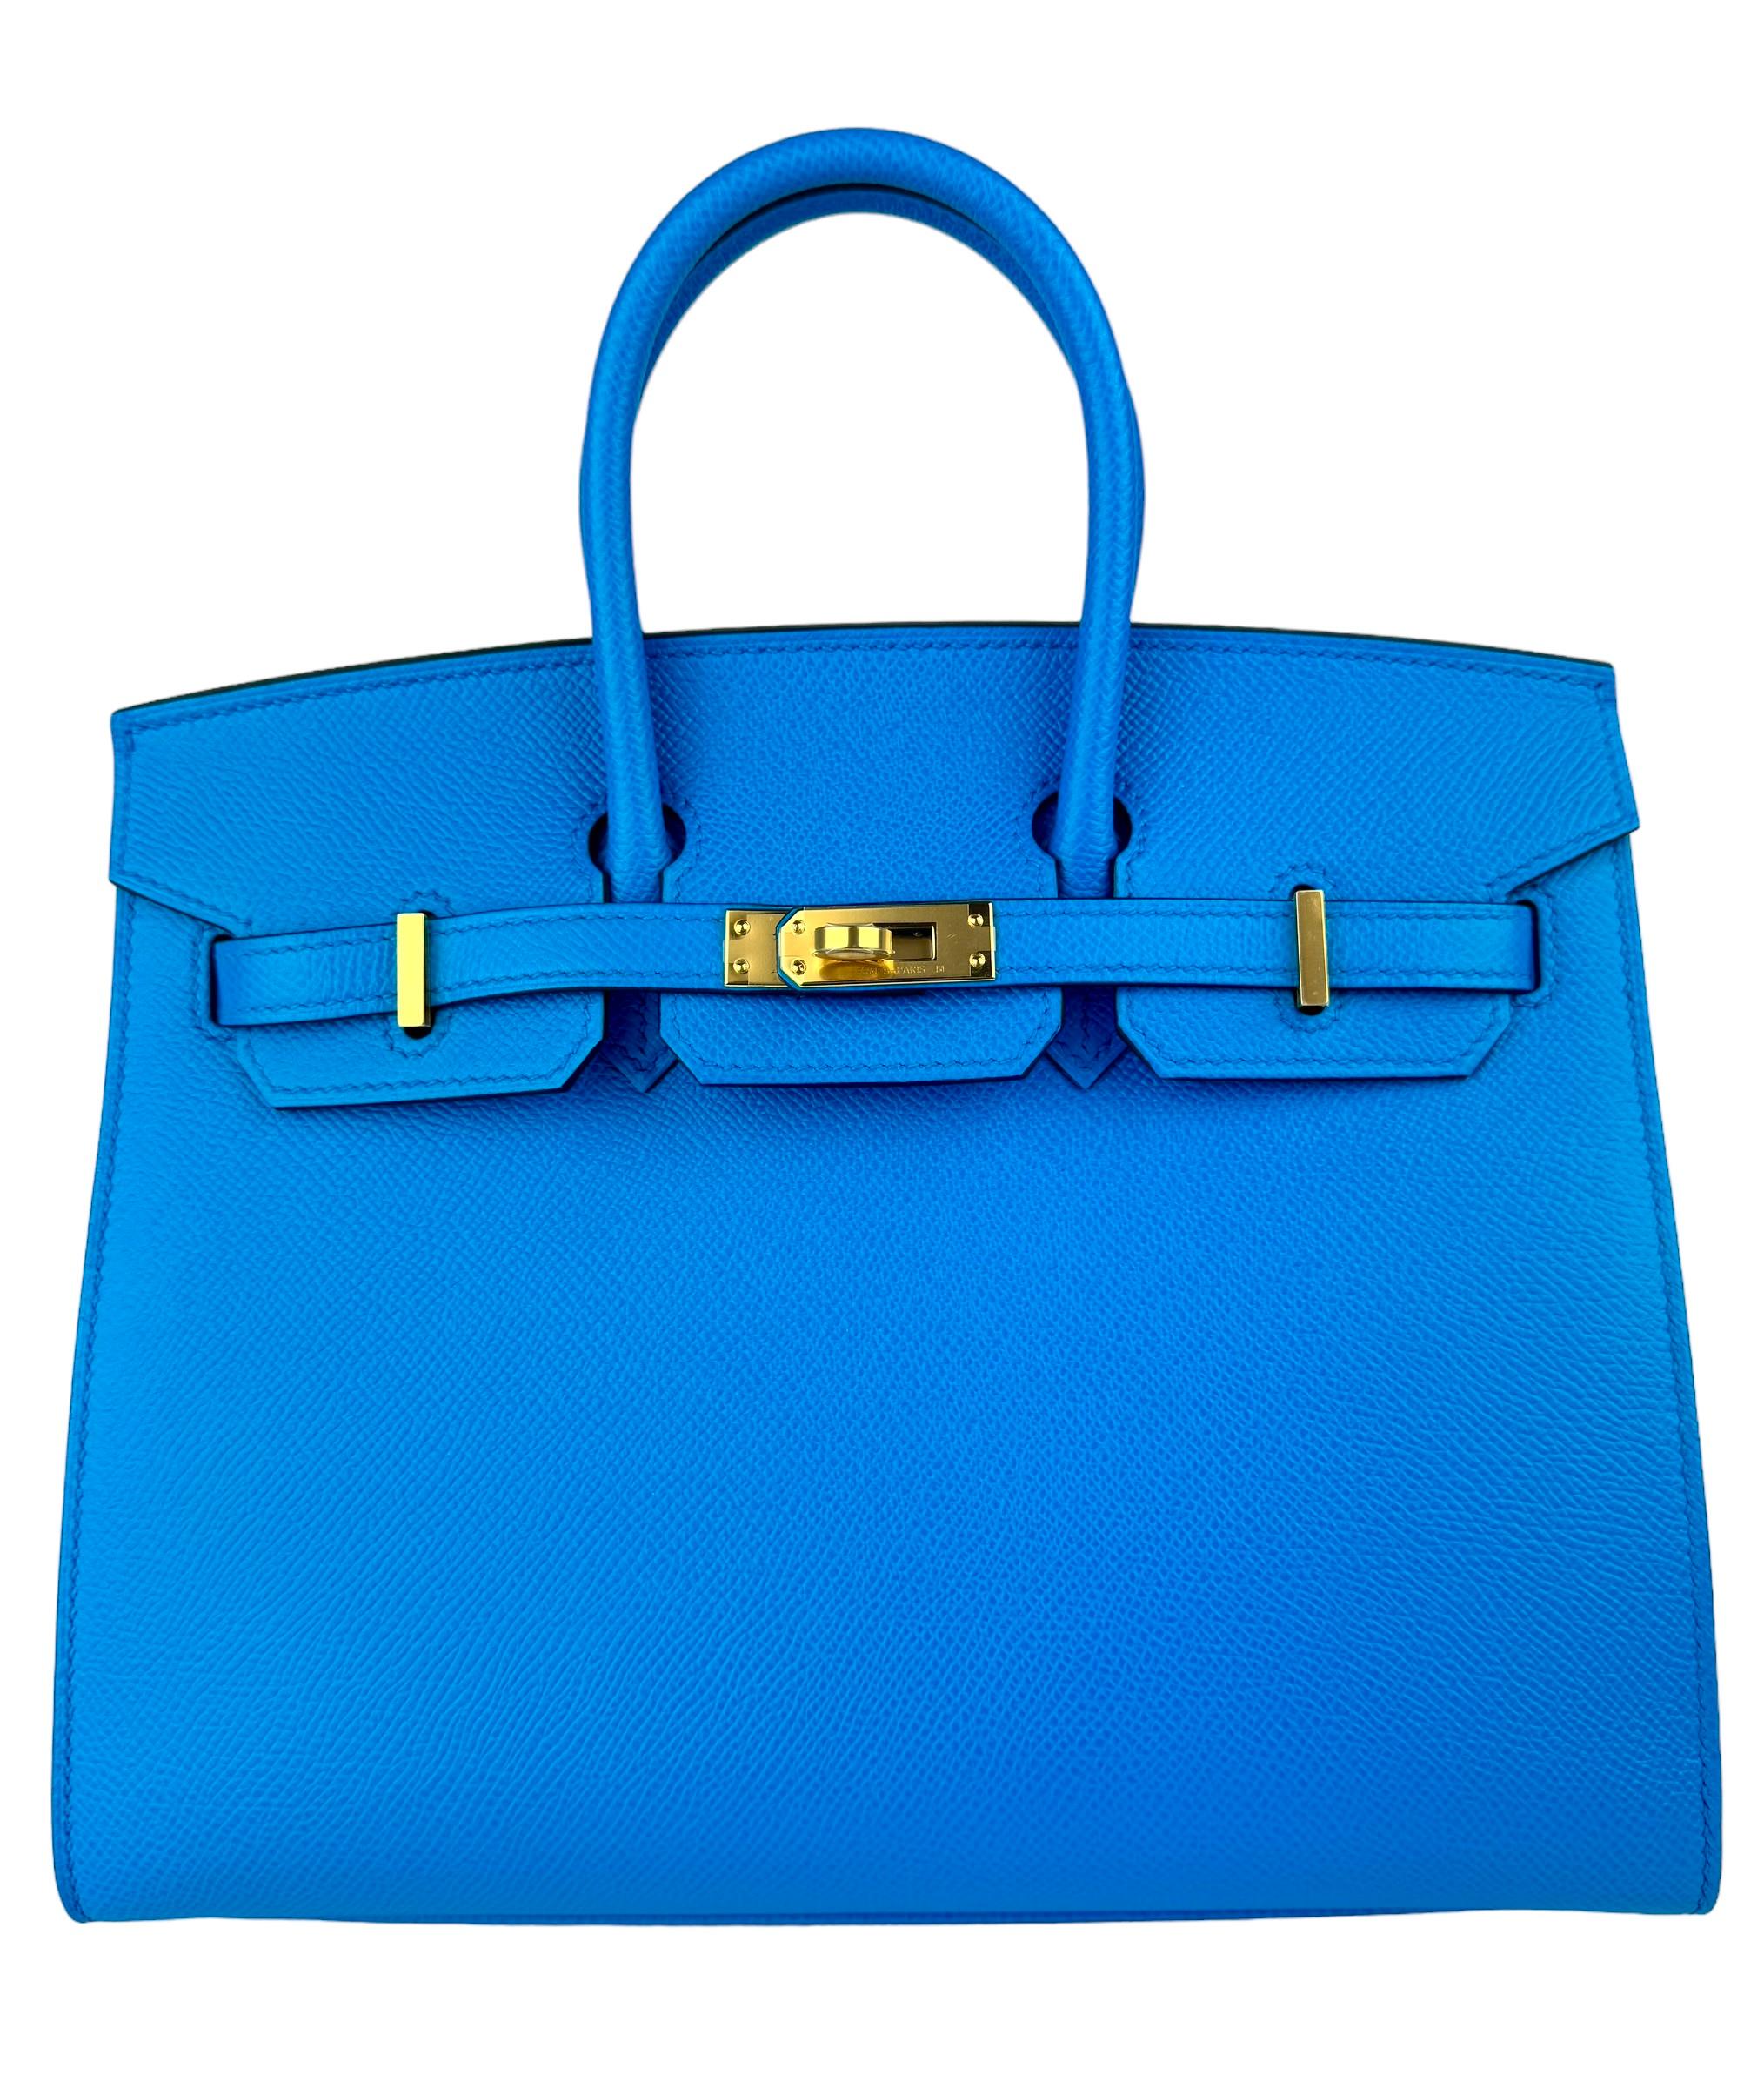 Absolutely Stunning and One The Most Coveted and Difficult to get Hermes Combos! As New Hermes Birkin 25 Sellier Blue Frida Epsom  Leather complimented by Gold Hardware. As New Plastic on all Hardware and Feet. Y Stamp 2020. Includes all Accessories